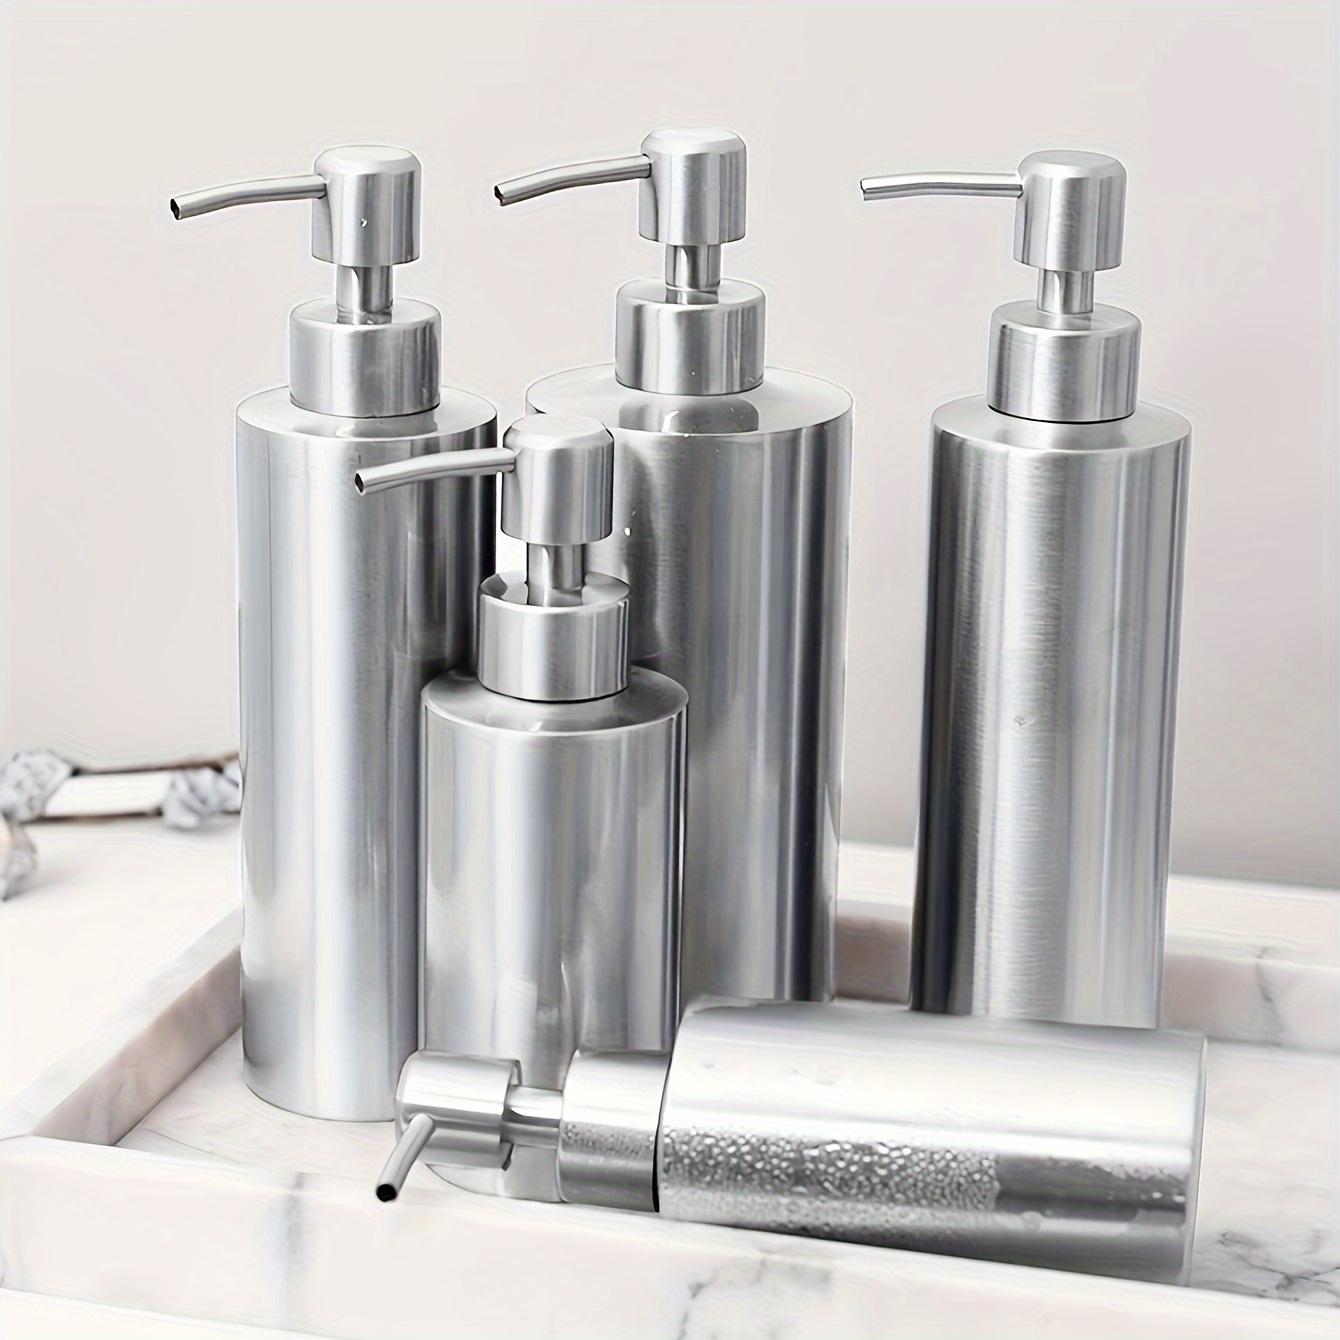 

1pc Stainless Steel Empty Soap Dispenser Bottle, Refillable Dispenser Bottle With Pump For Lotion, Shower Gel, Shampoo And Conditioner, Bathroom Hotel Accessories